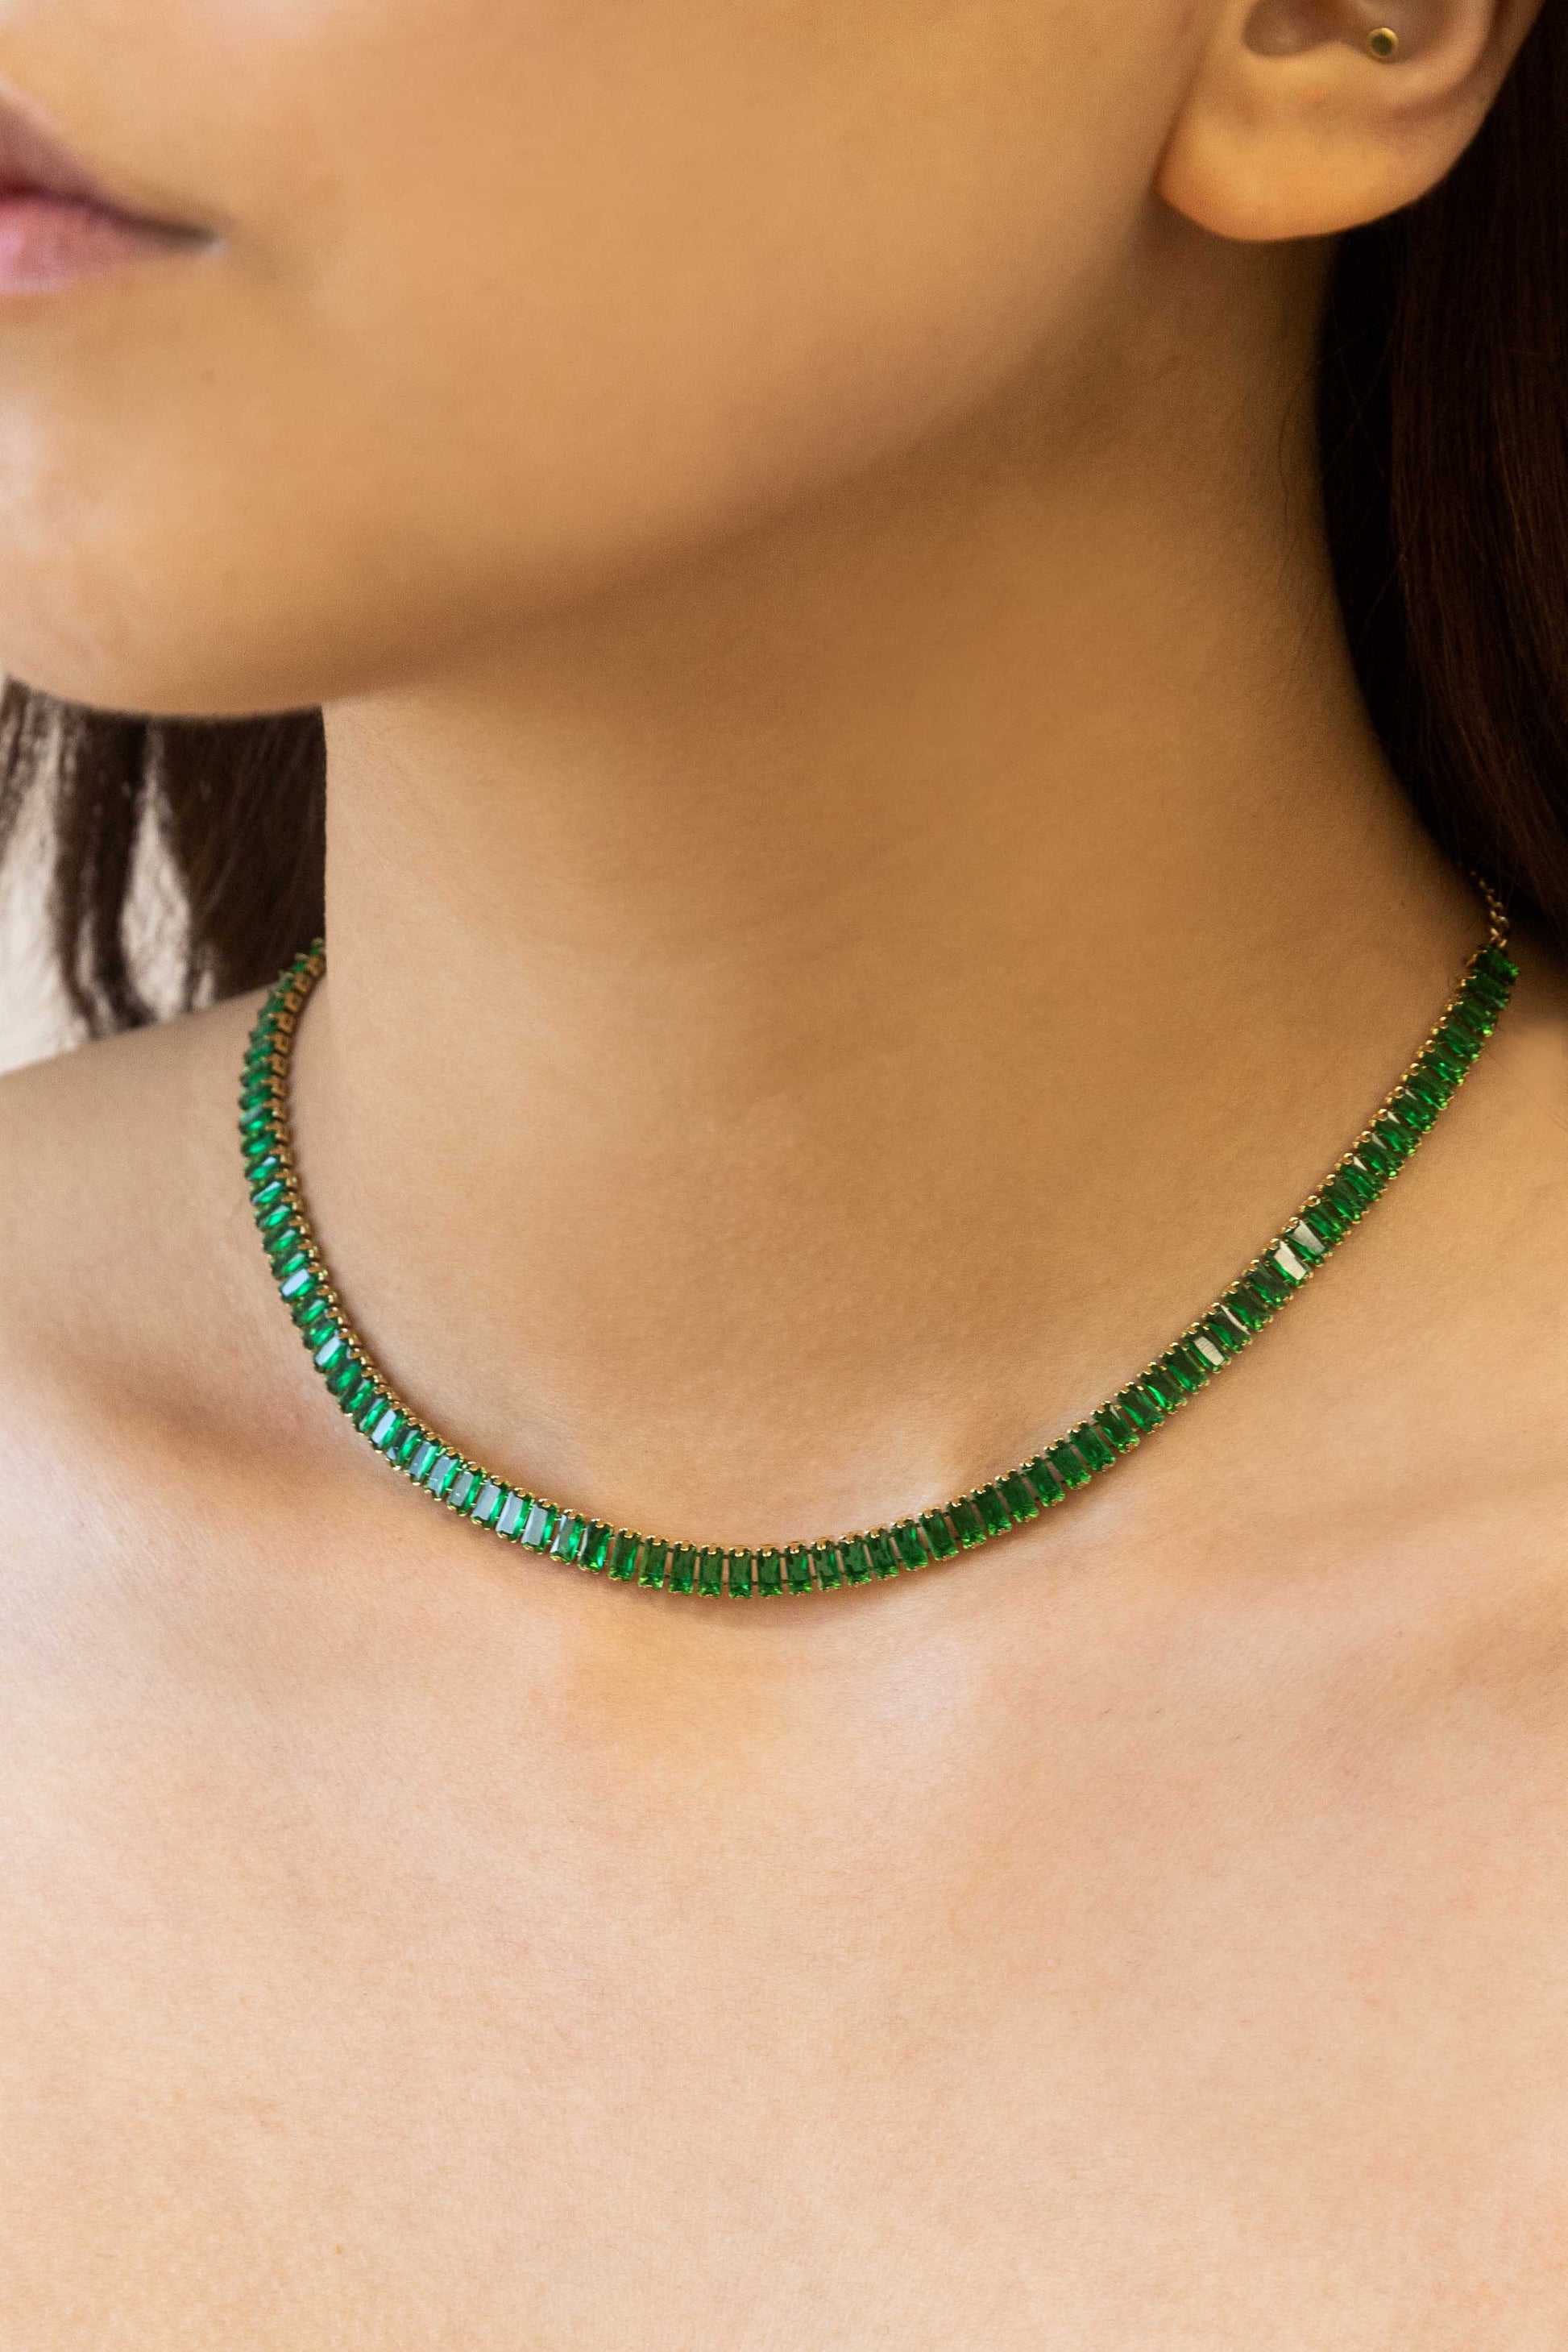 Fancy tennis necklace with emeralds and diamonds